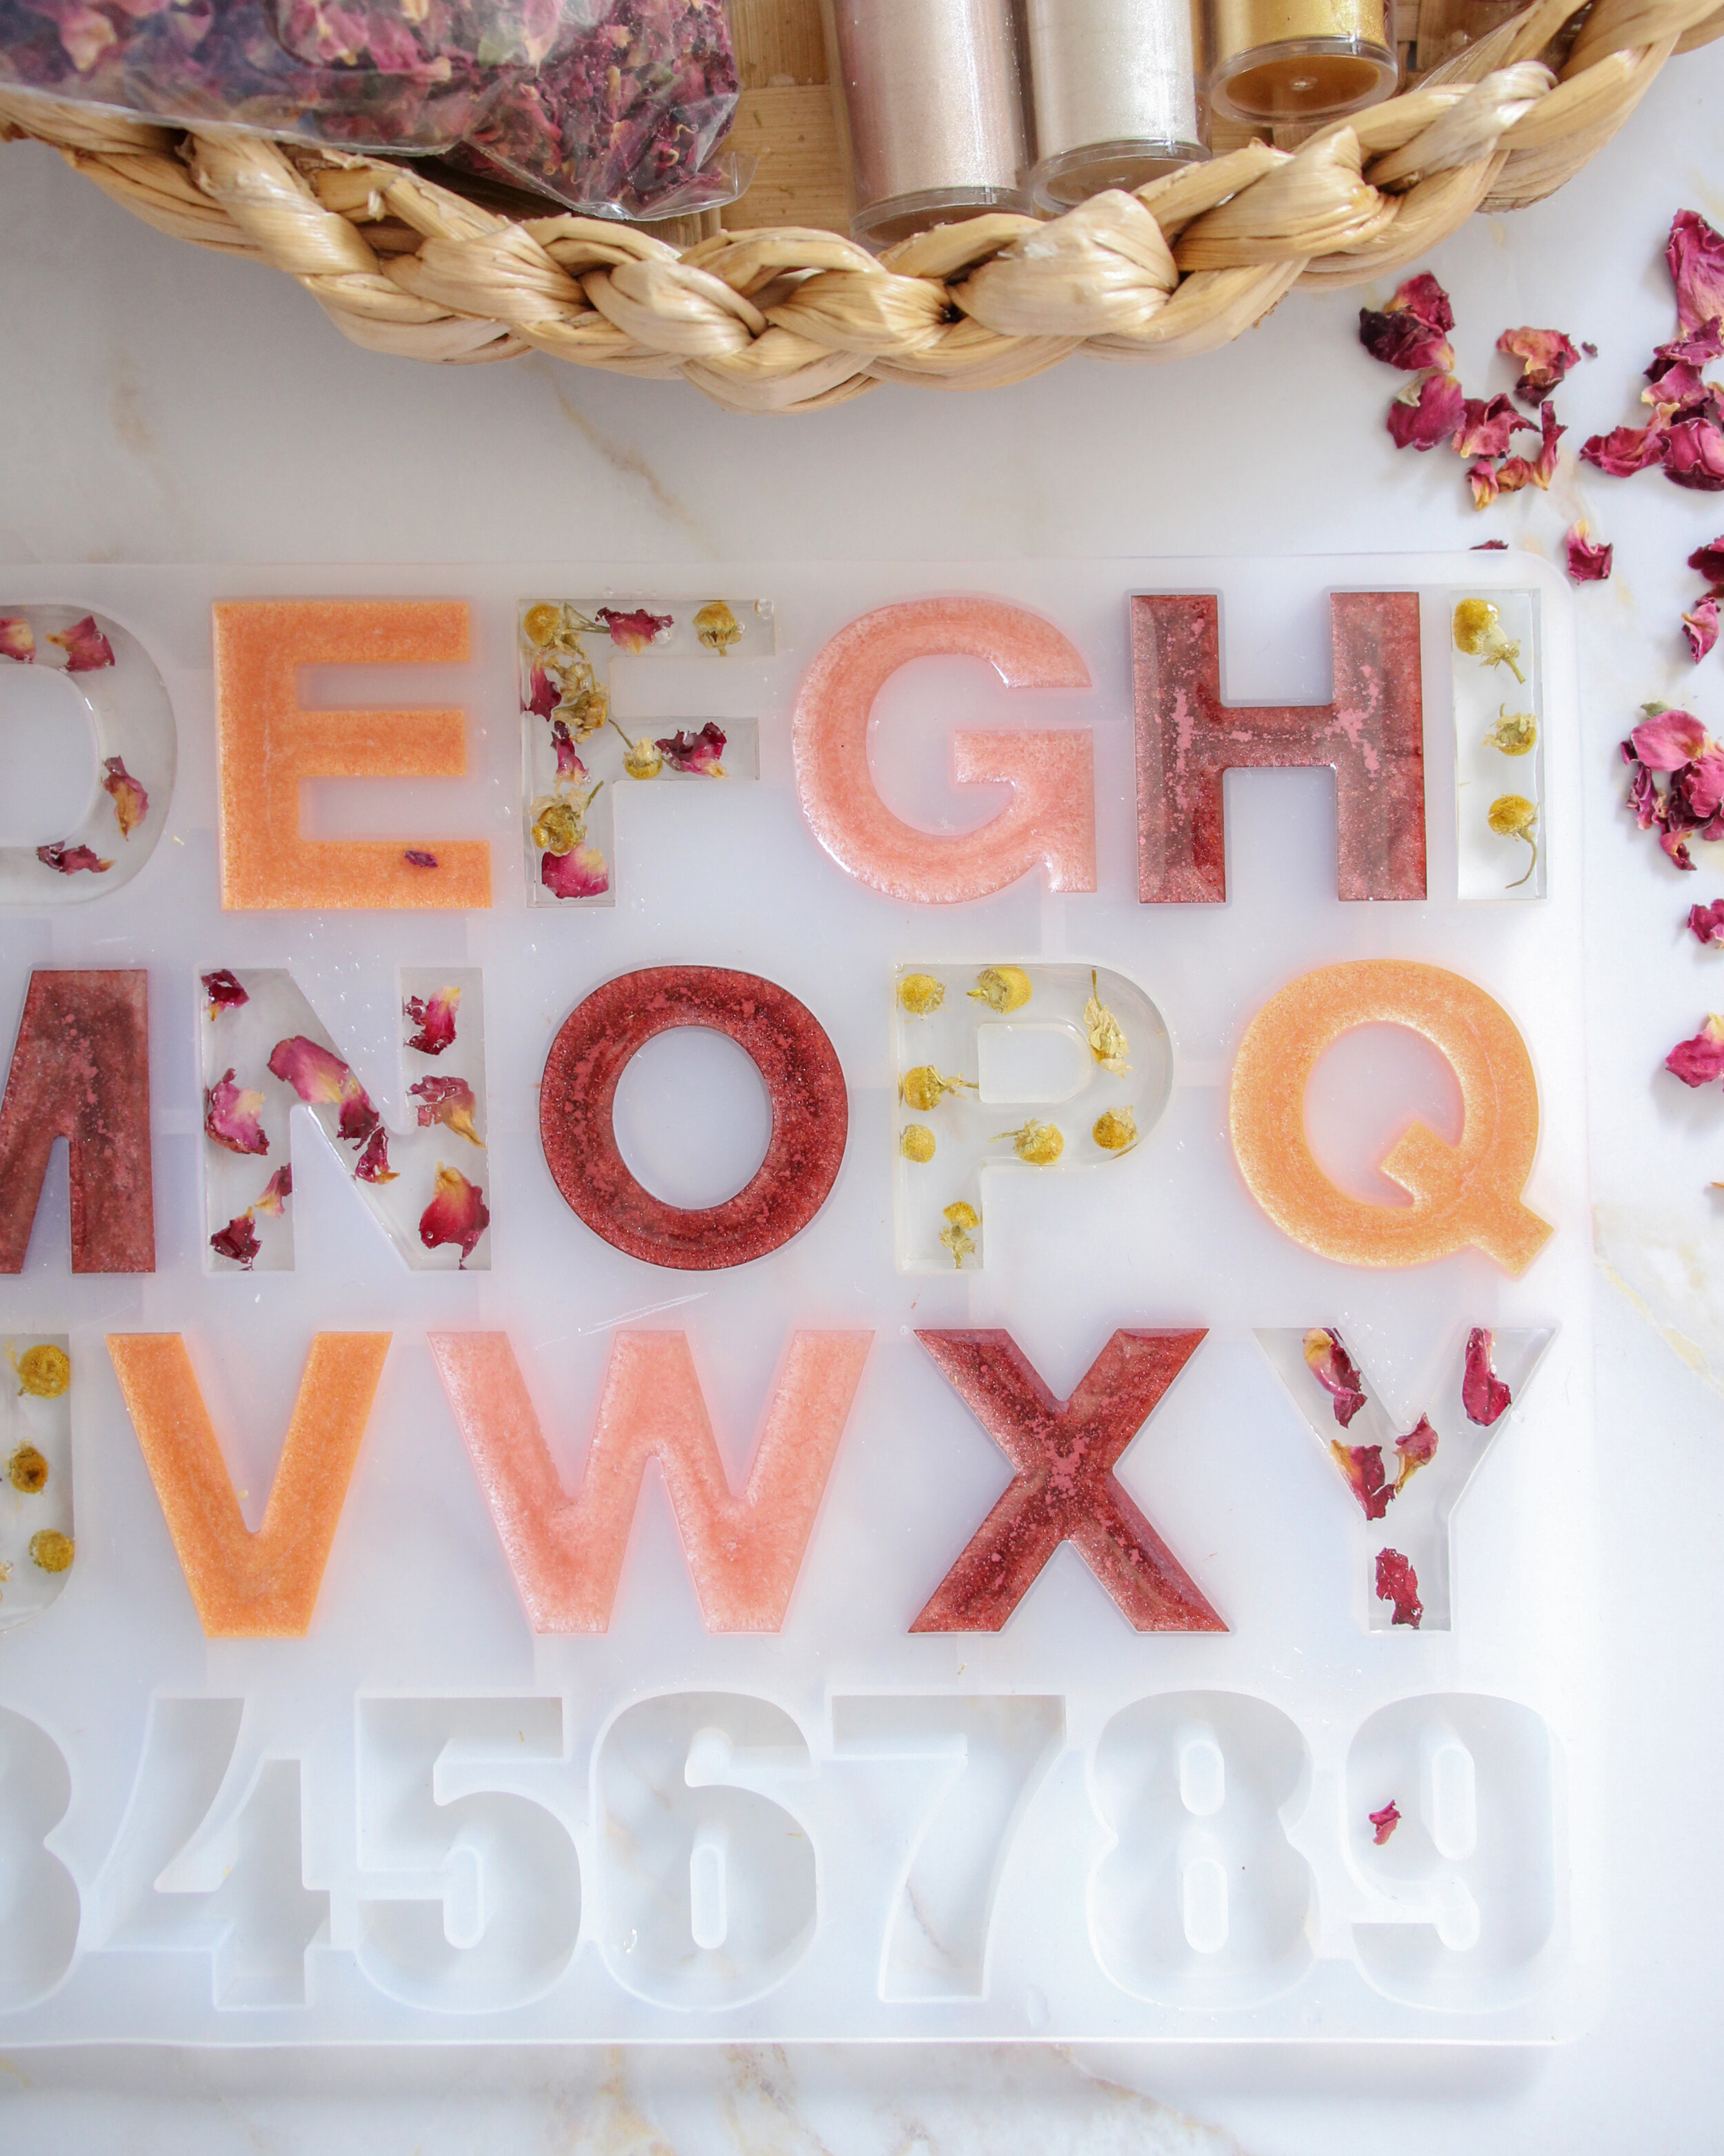 How to Make Resin Letters - A Guide to Making Resin Alphabet Letters